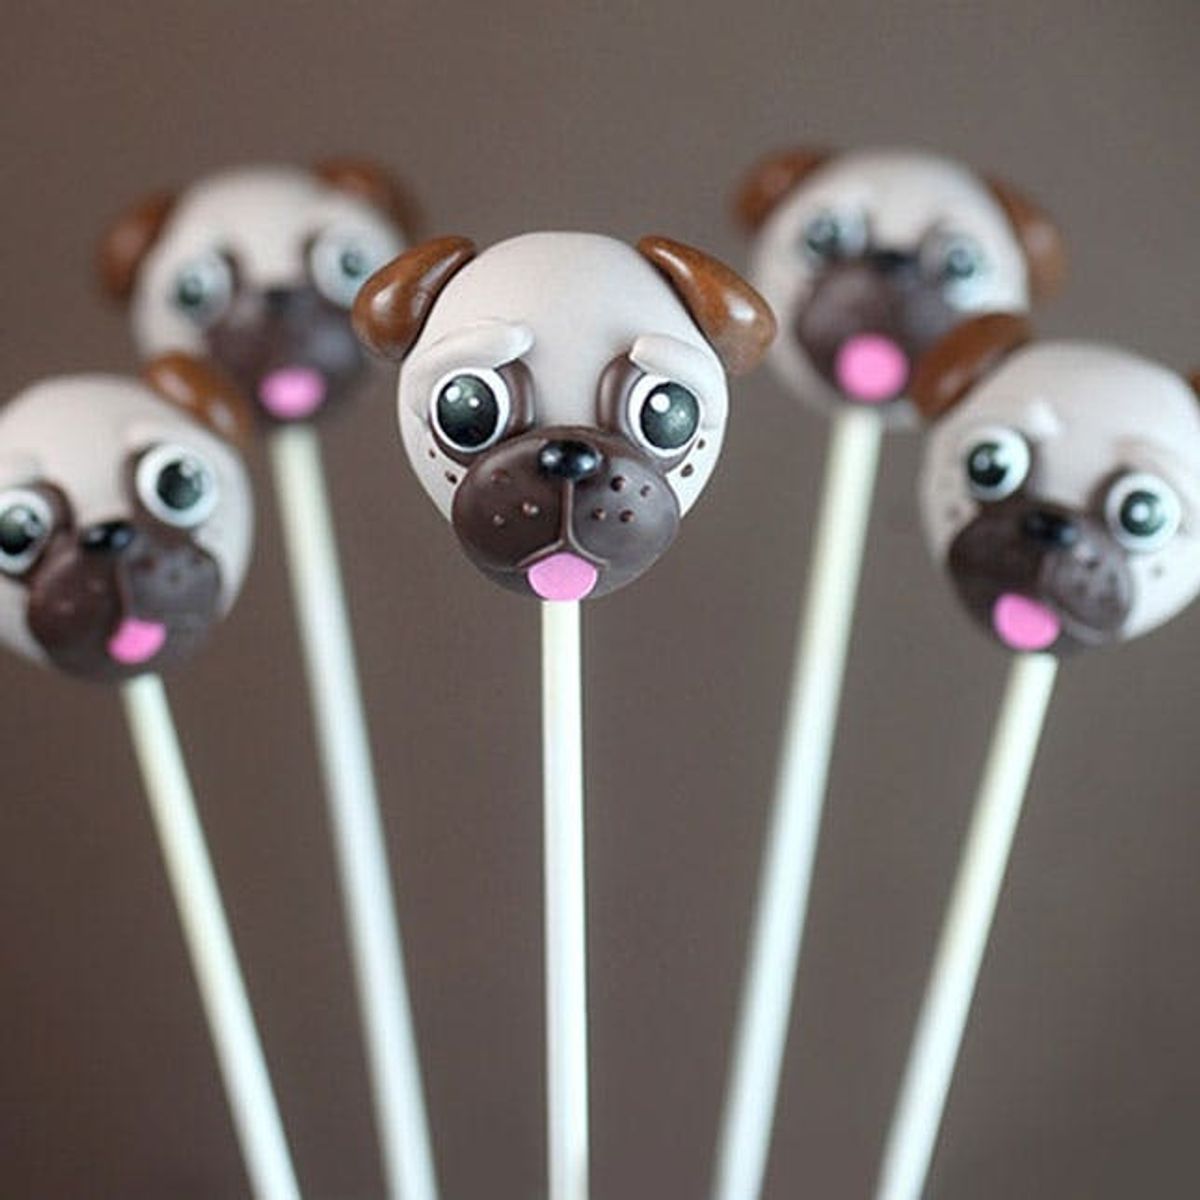 You Need to Make These Peanut Butter Pug Cake Pops ASAP